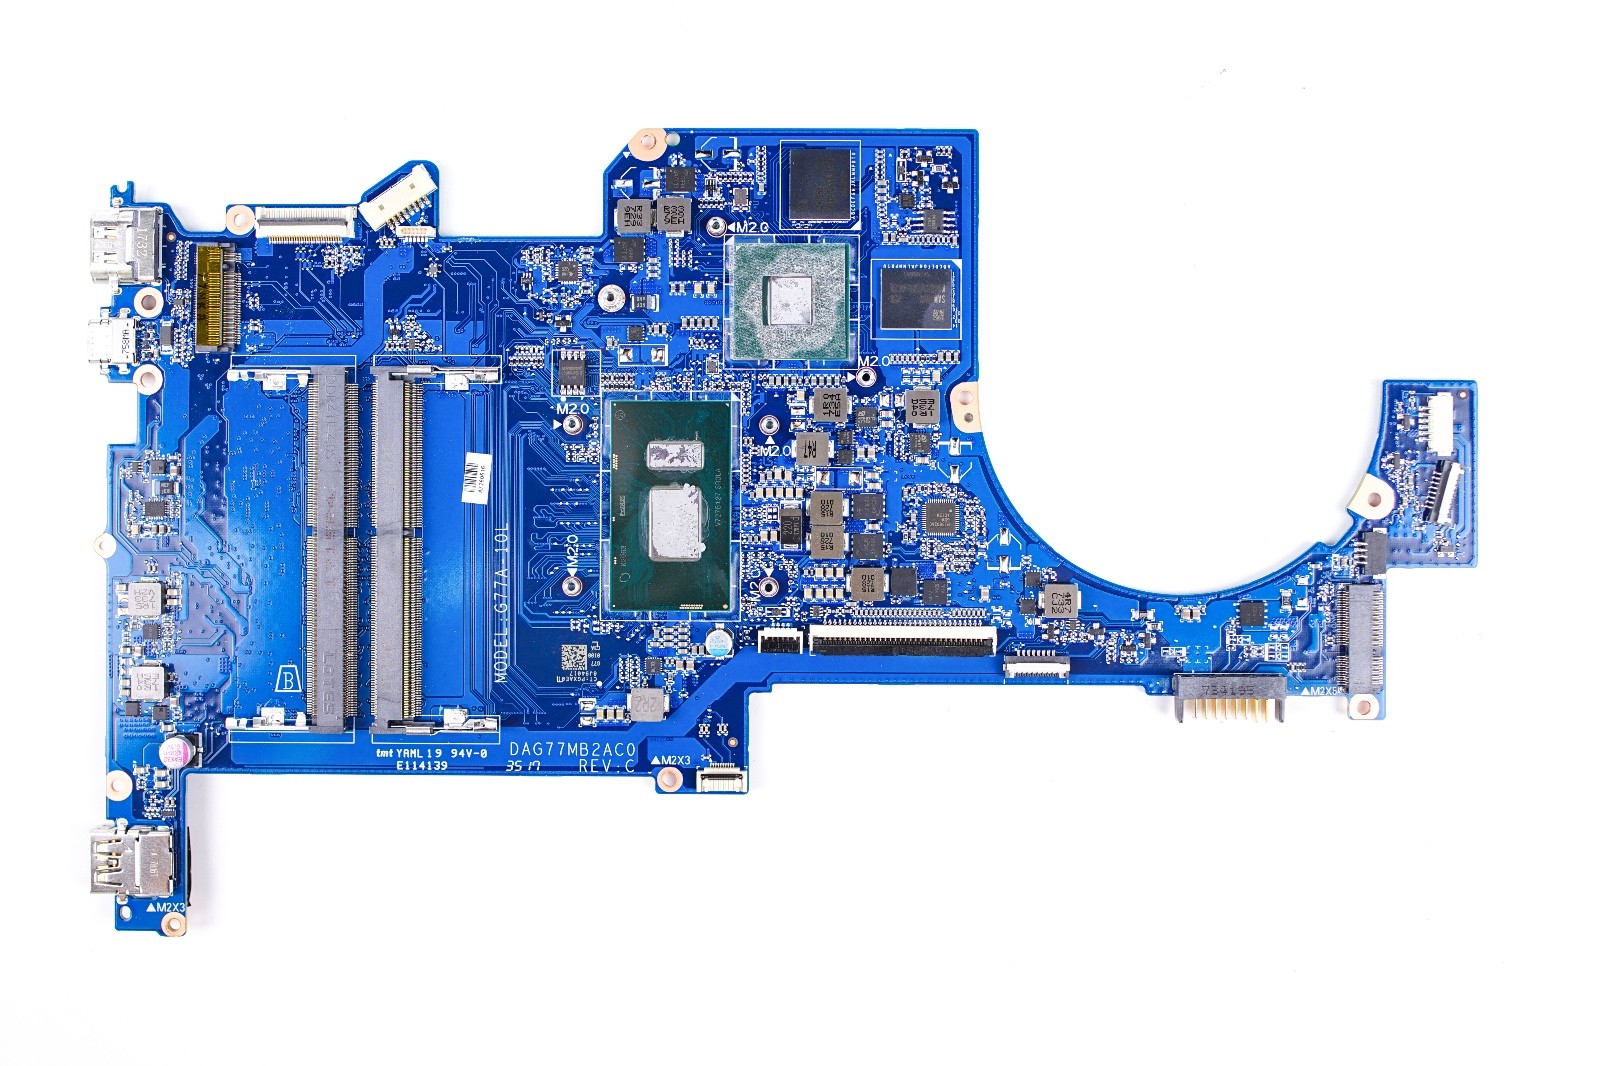 HP Pavilion 15-ck000 Disassembly and RAM, SSD and HDD upgrade options